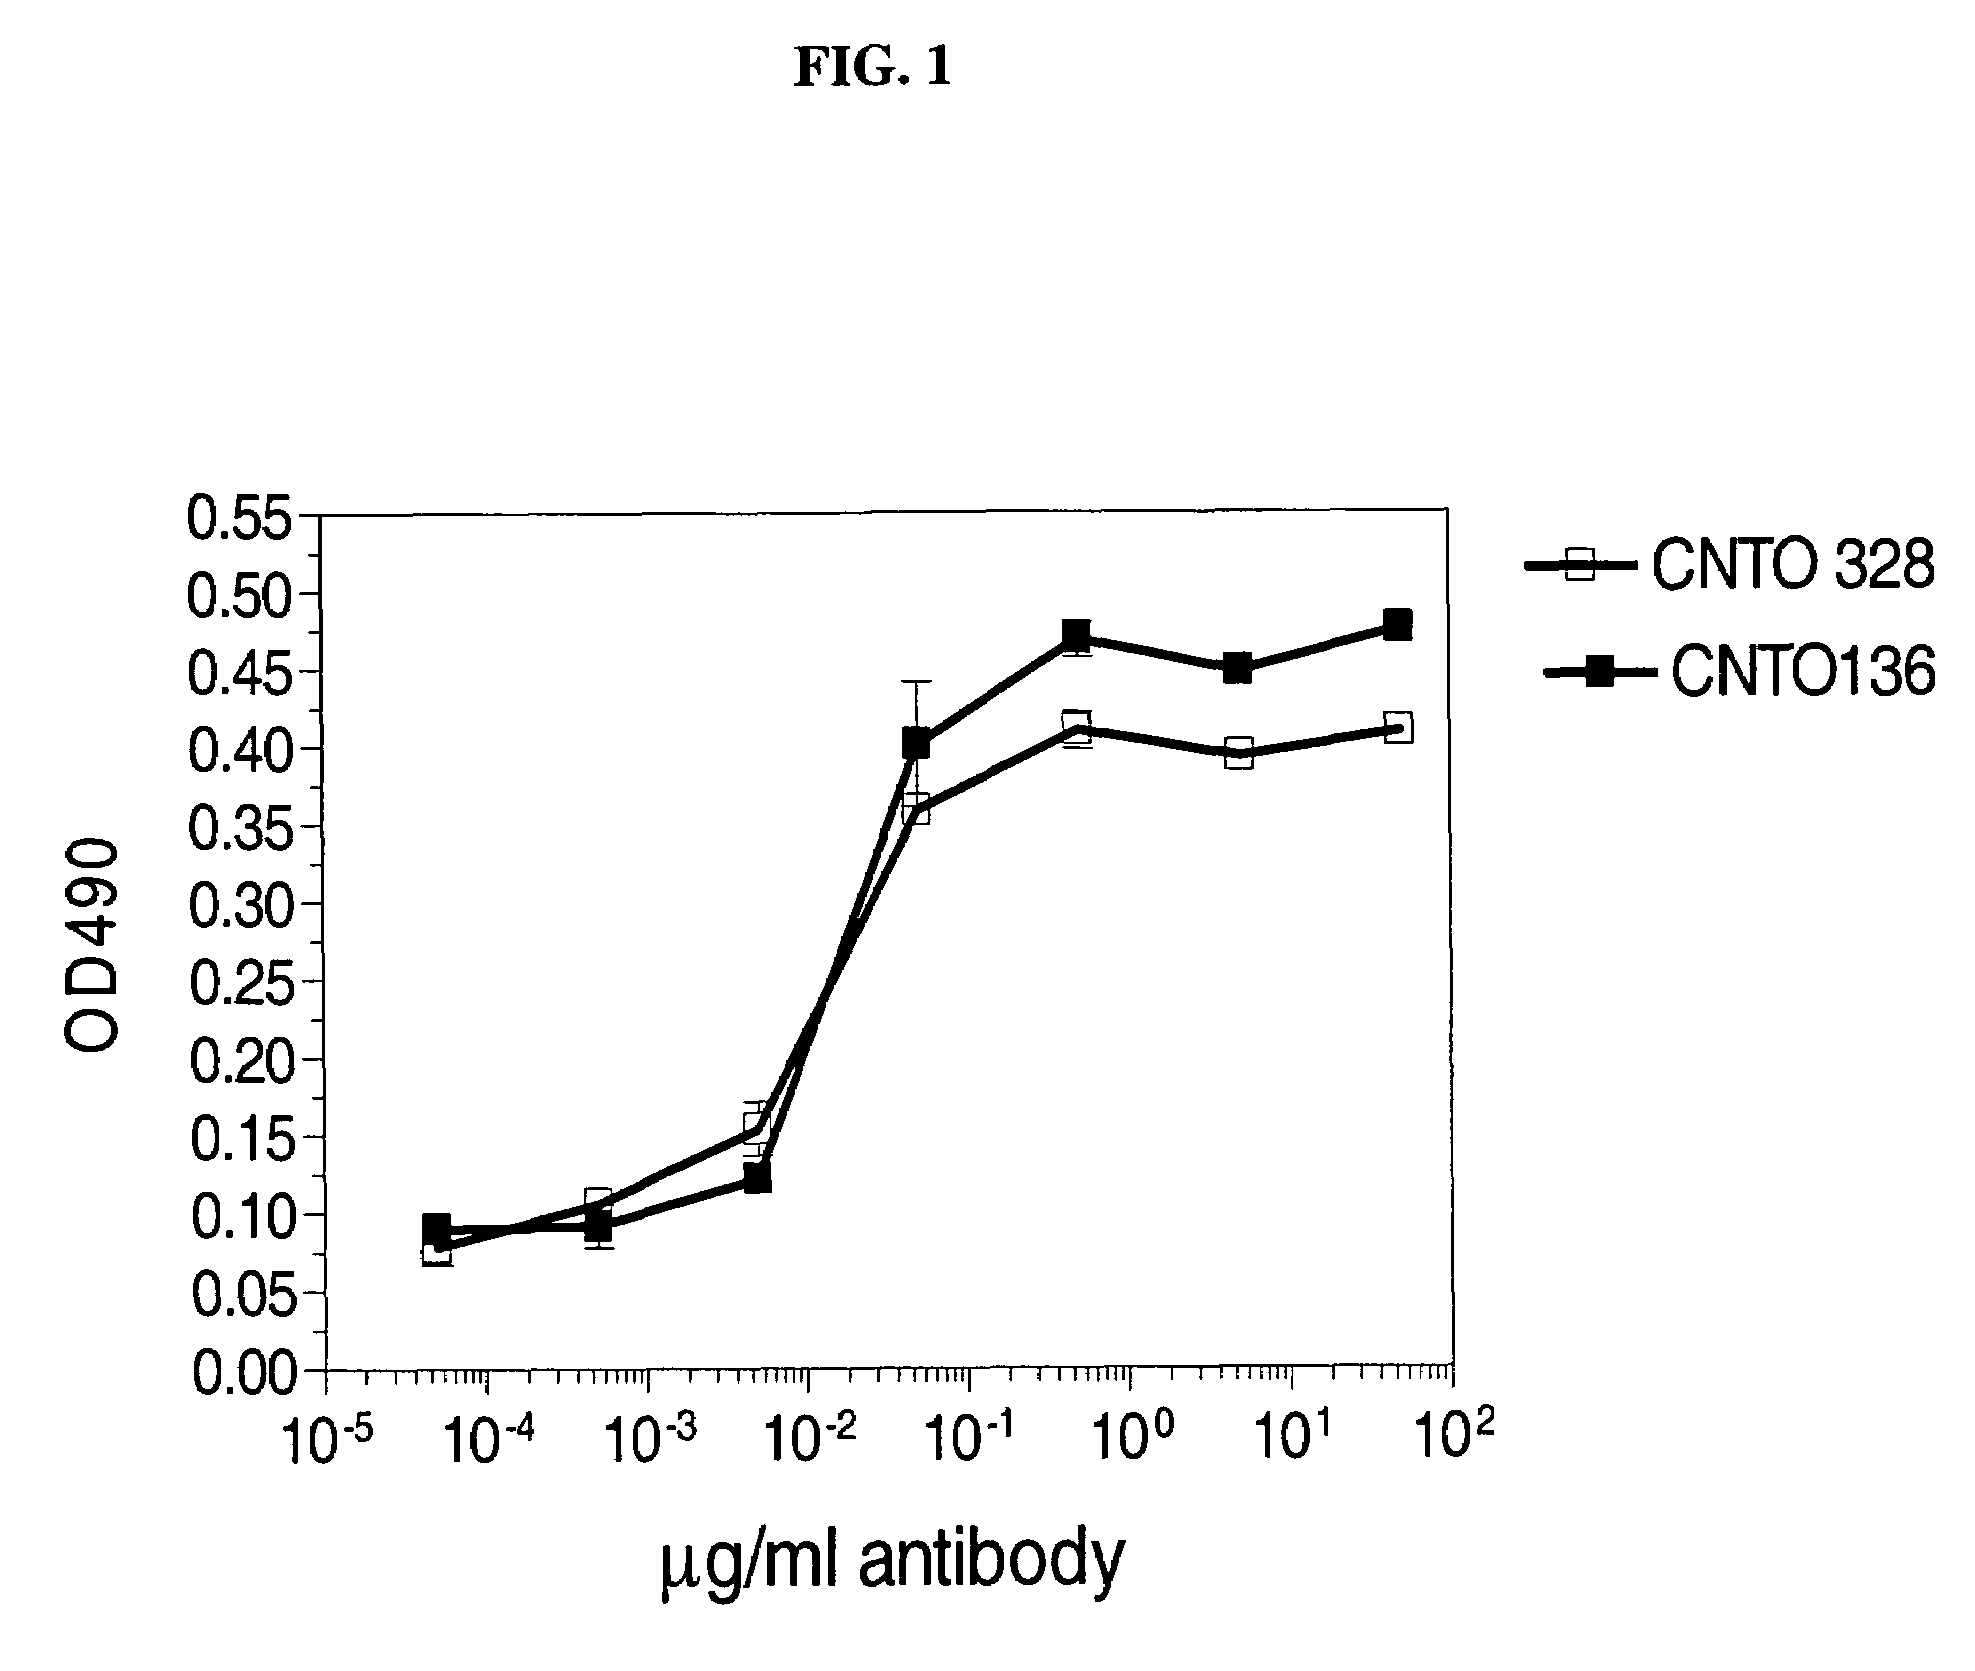 Anti-il-6 antibodies, compositions, methods and uses